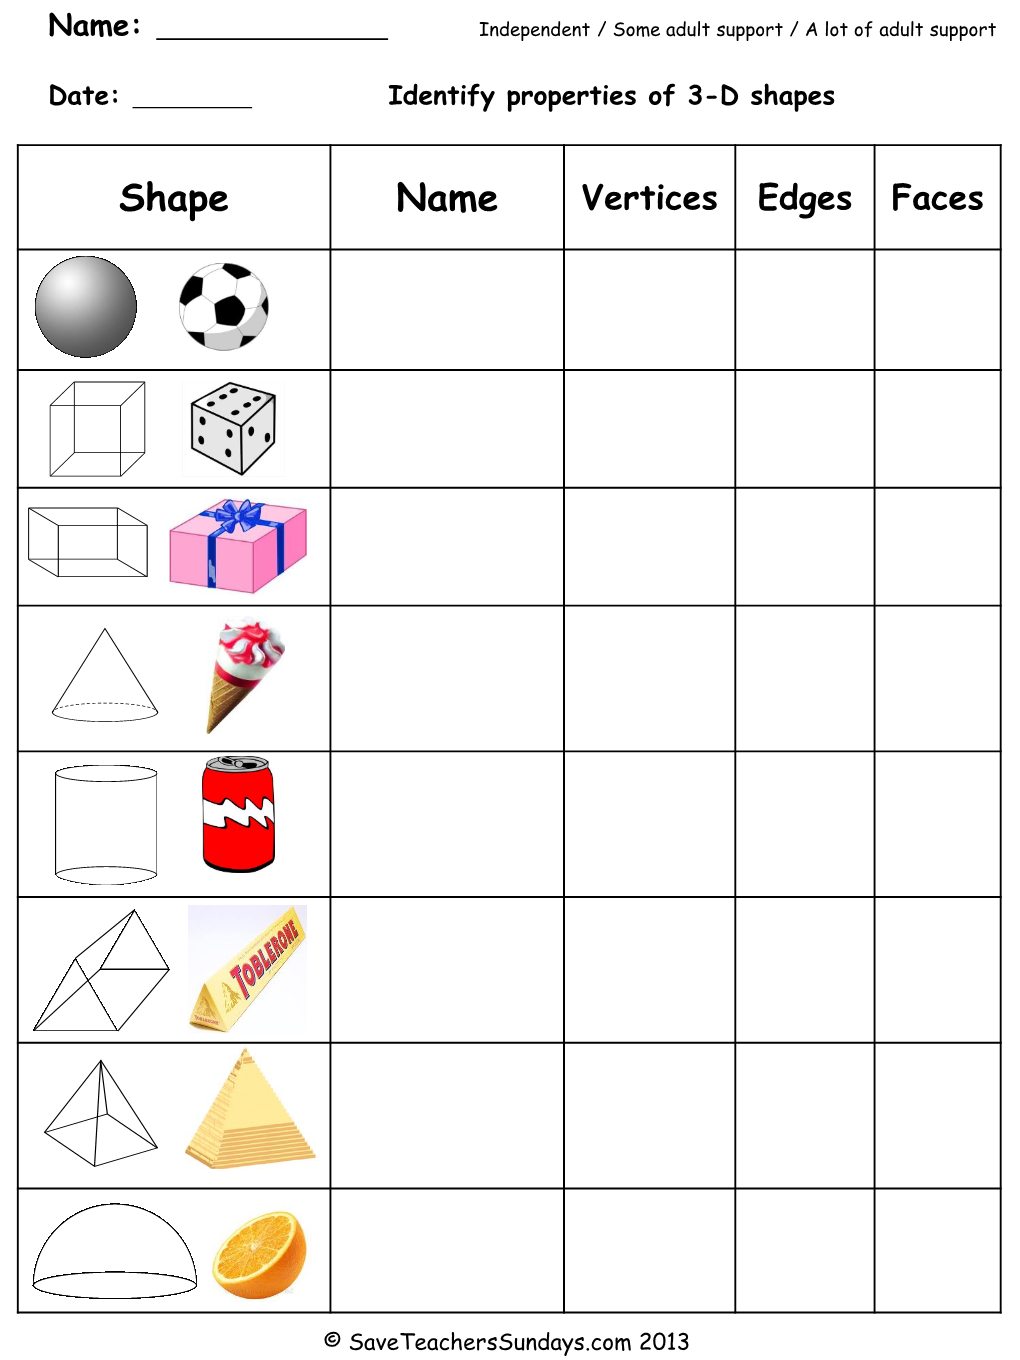 Name: Date: Identify Properties of 3-D Shapes